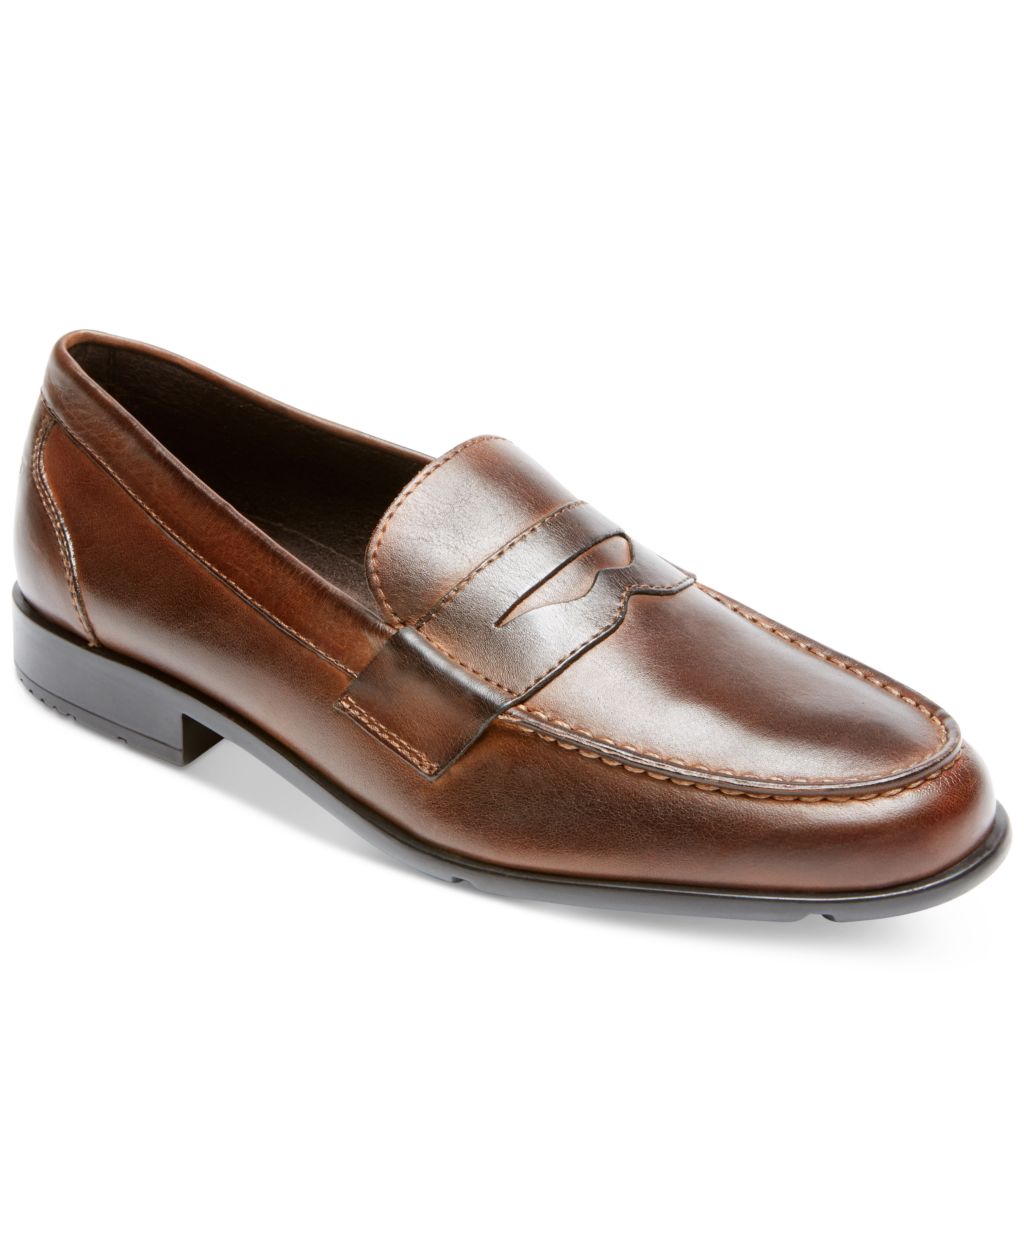 Rockport Leather Upper Men's Classic Penny Loafers